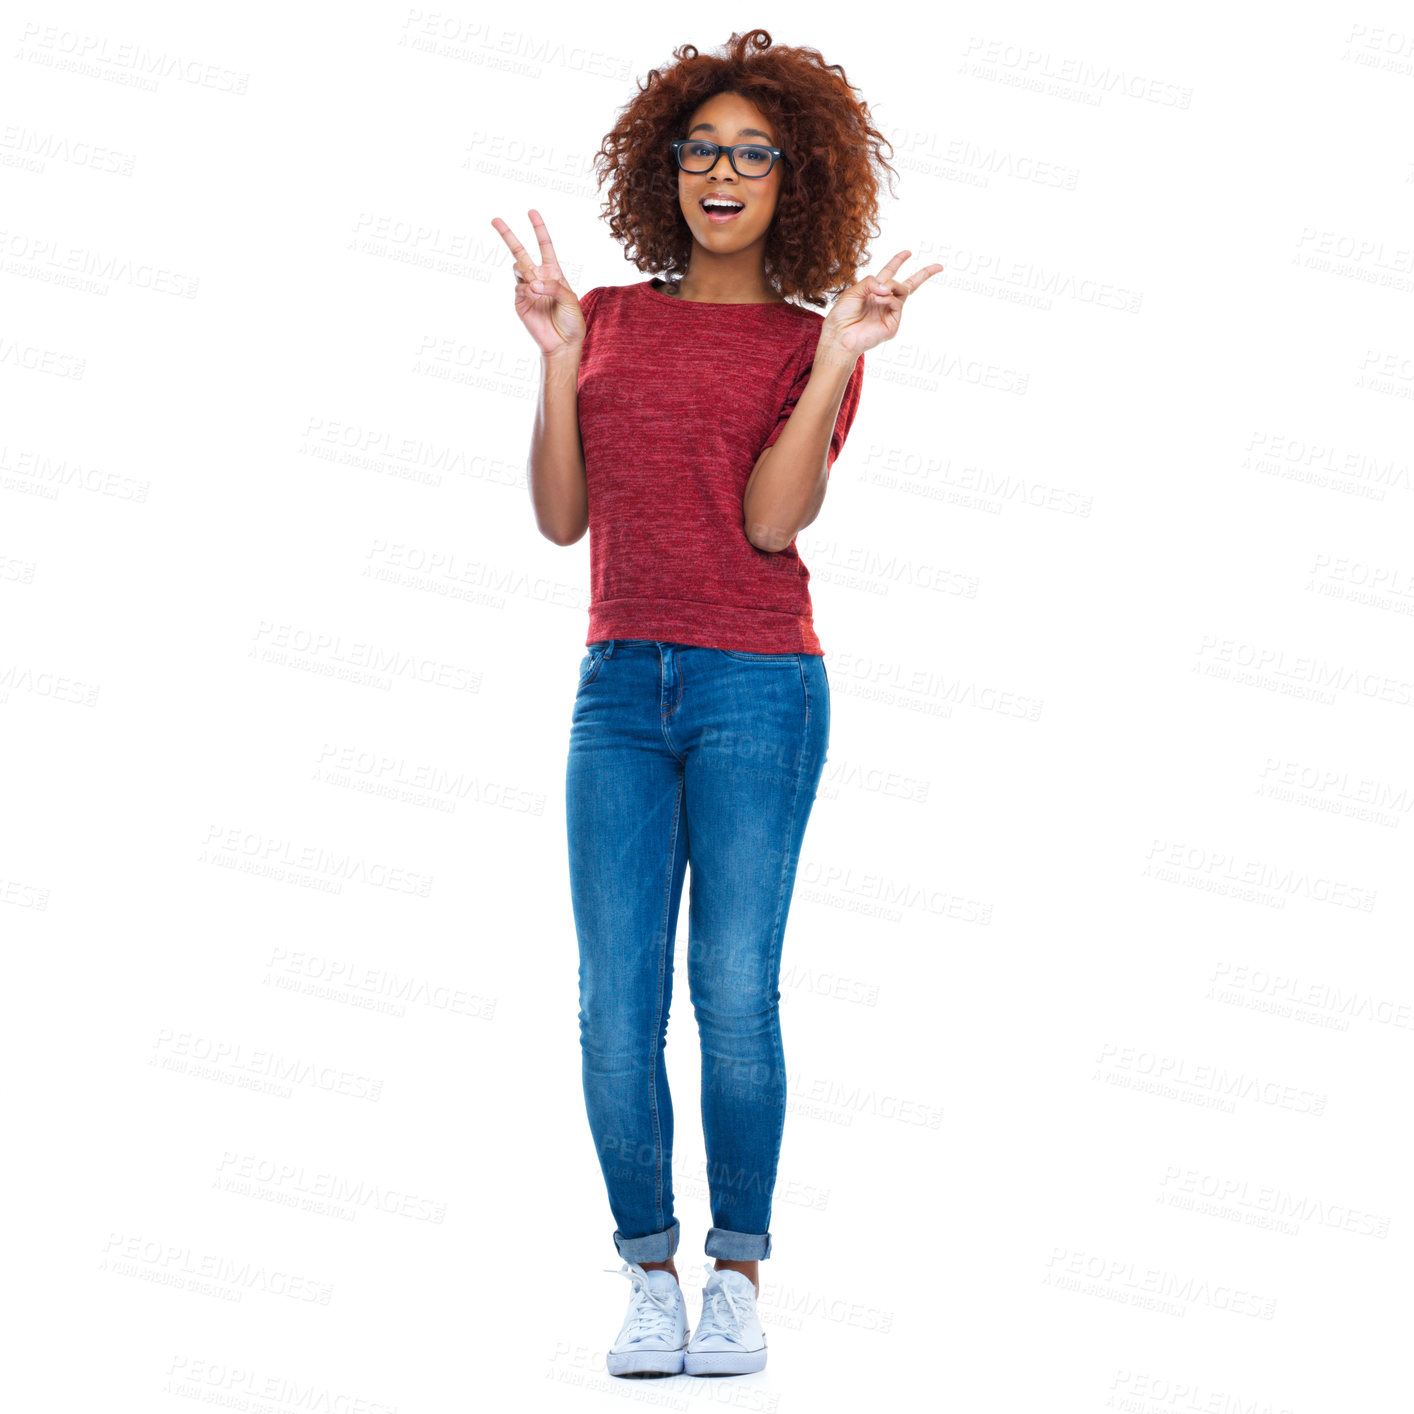 Buy stock photo Portrait, peace and emoji with a black woman in studio isolated on a white background with a hand sign. Comic, social media and gesture with a happy young female posing on blank advertising space